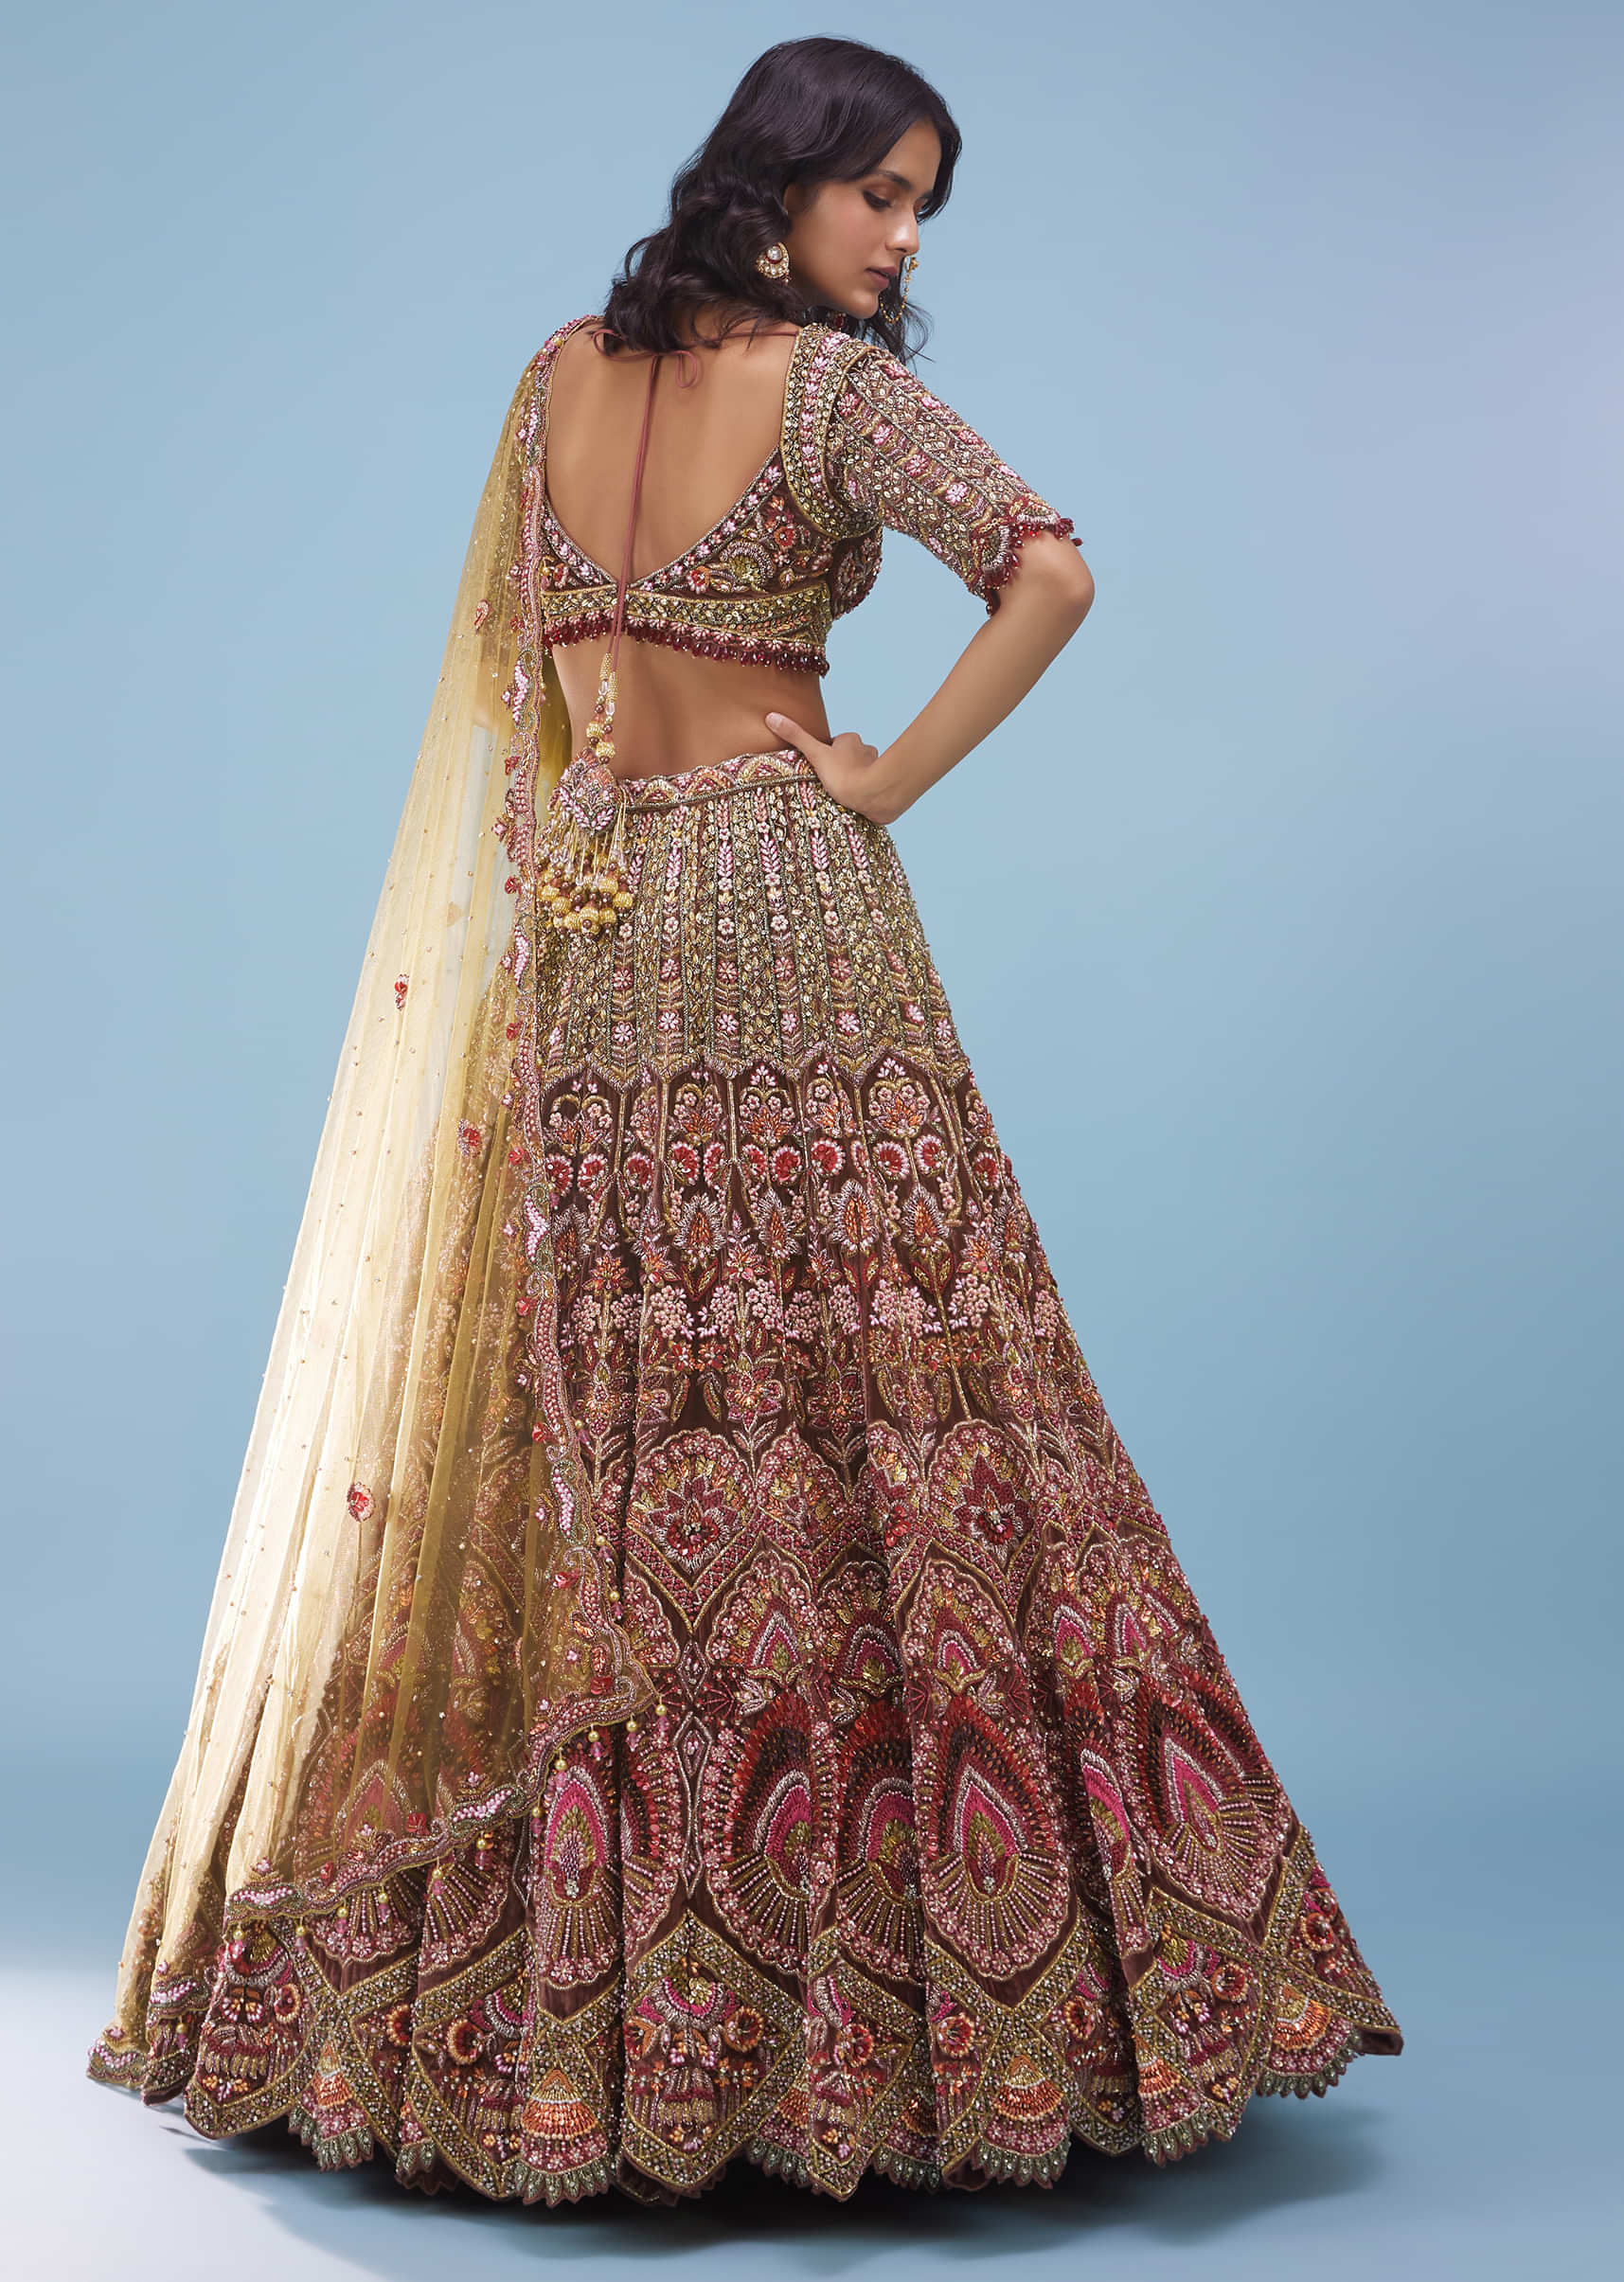 Chocolate Brown Maharani Bridal Lehenga In Velvet With Heavy Floral Embroidery - NOOR 2022